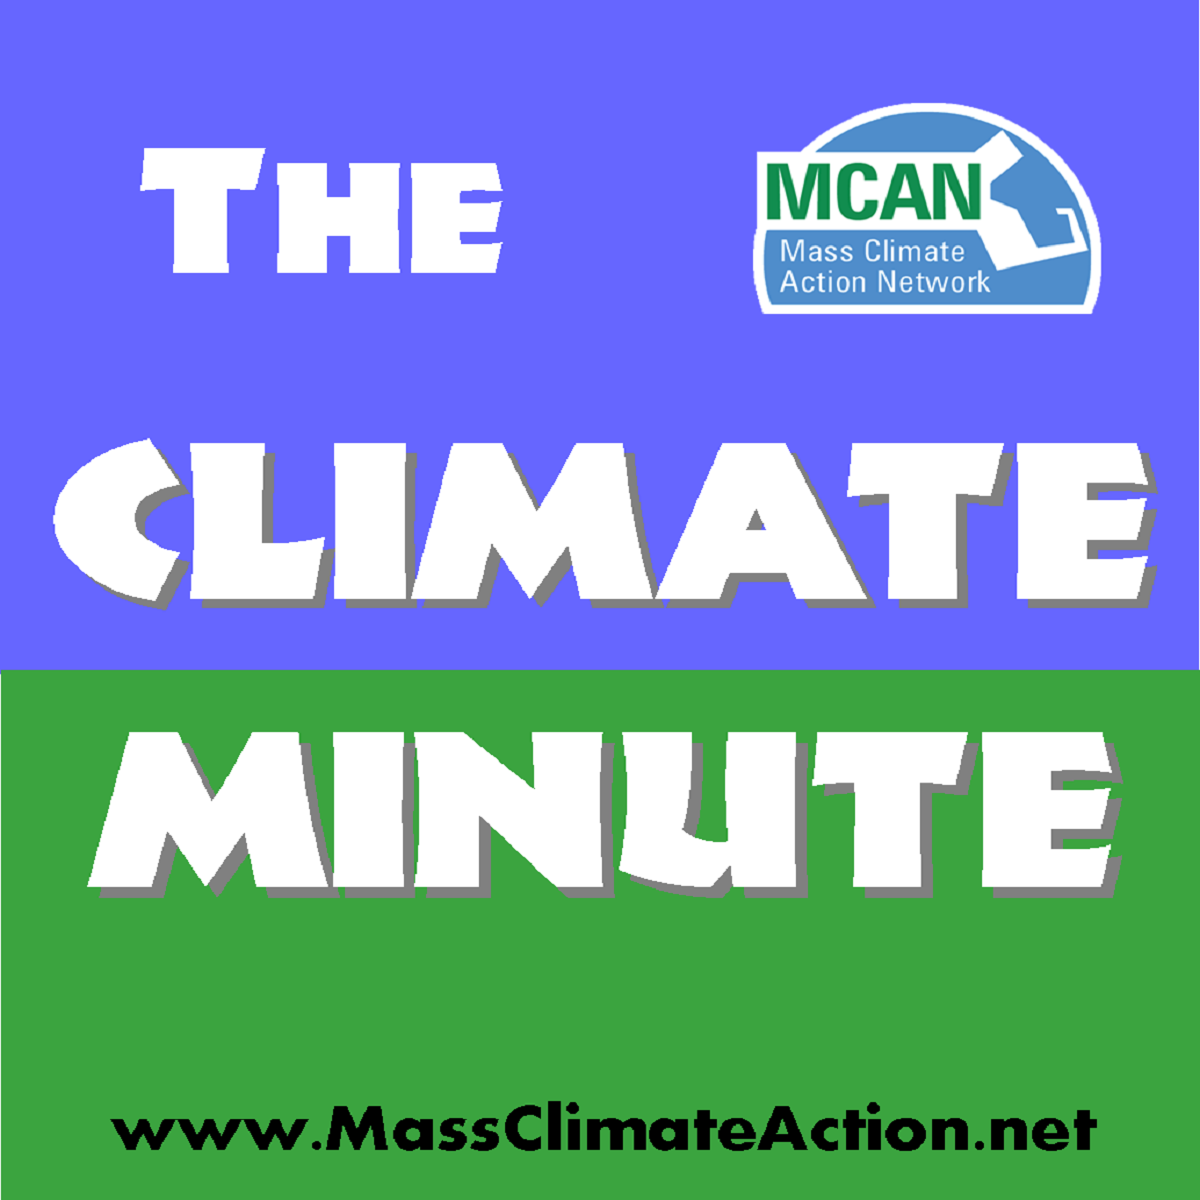 What did Exxon know, and when did it know it? - The Climate Minute Podcast